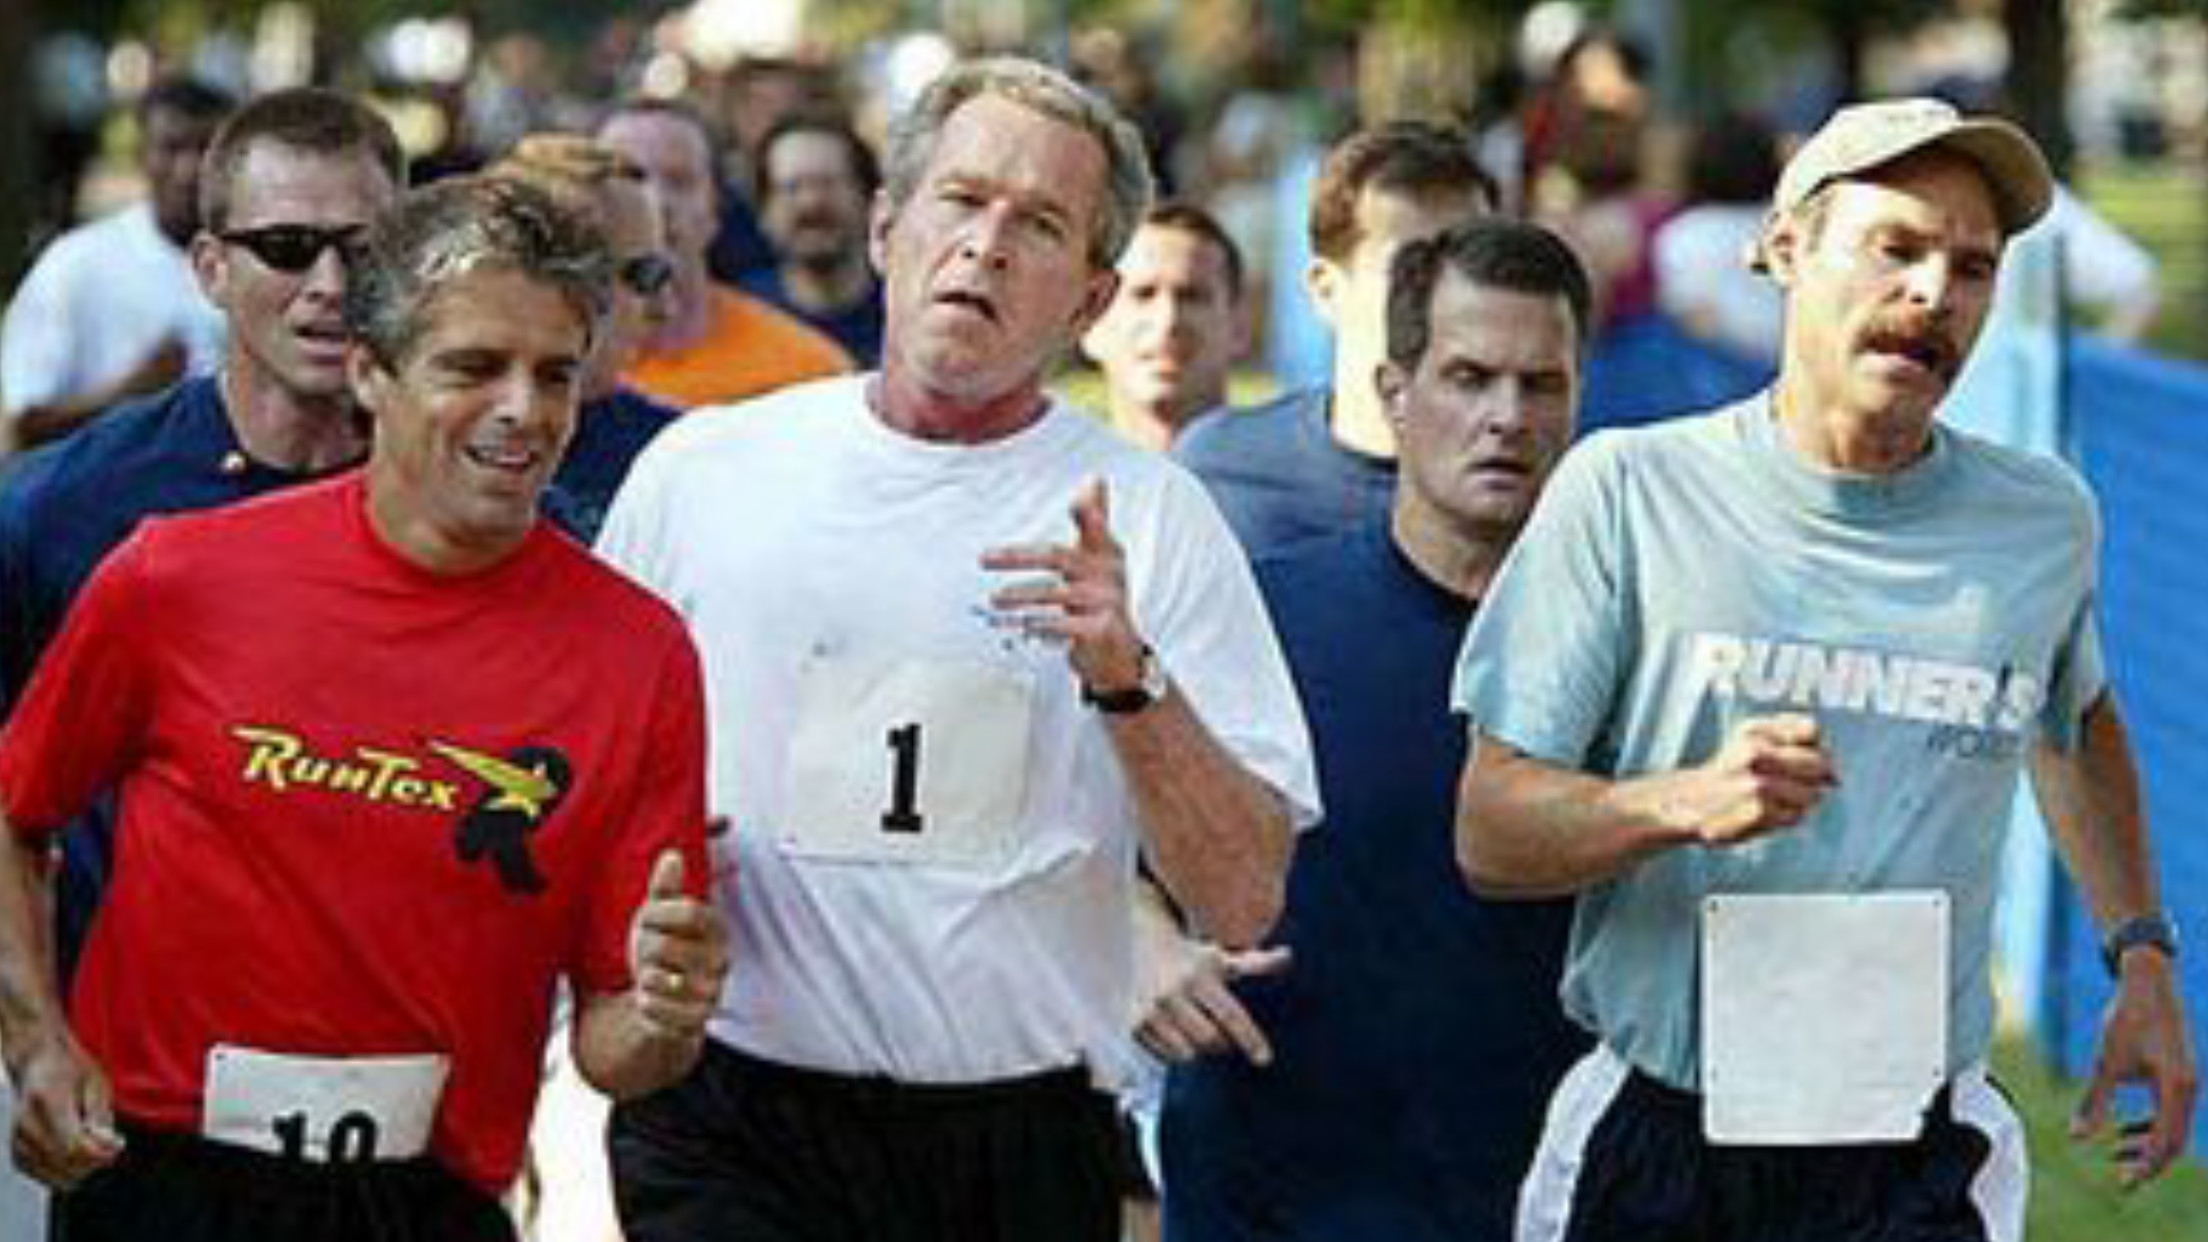 What is the fastest Marathon time run by a US President?